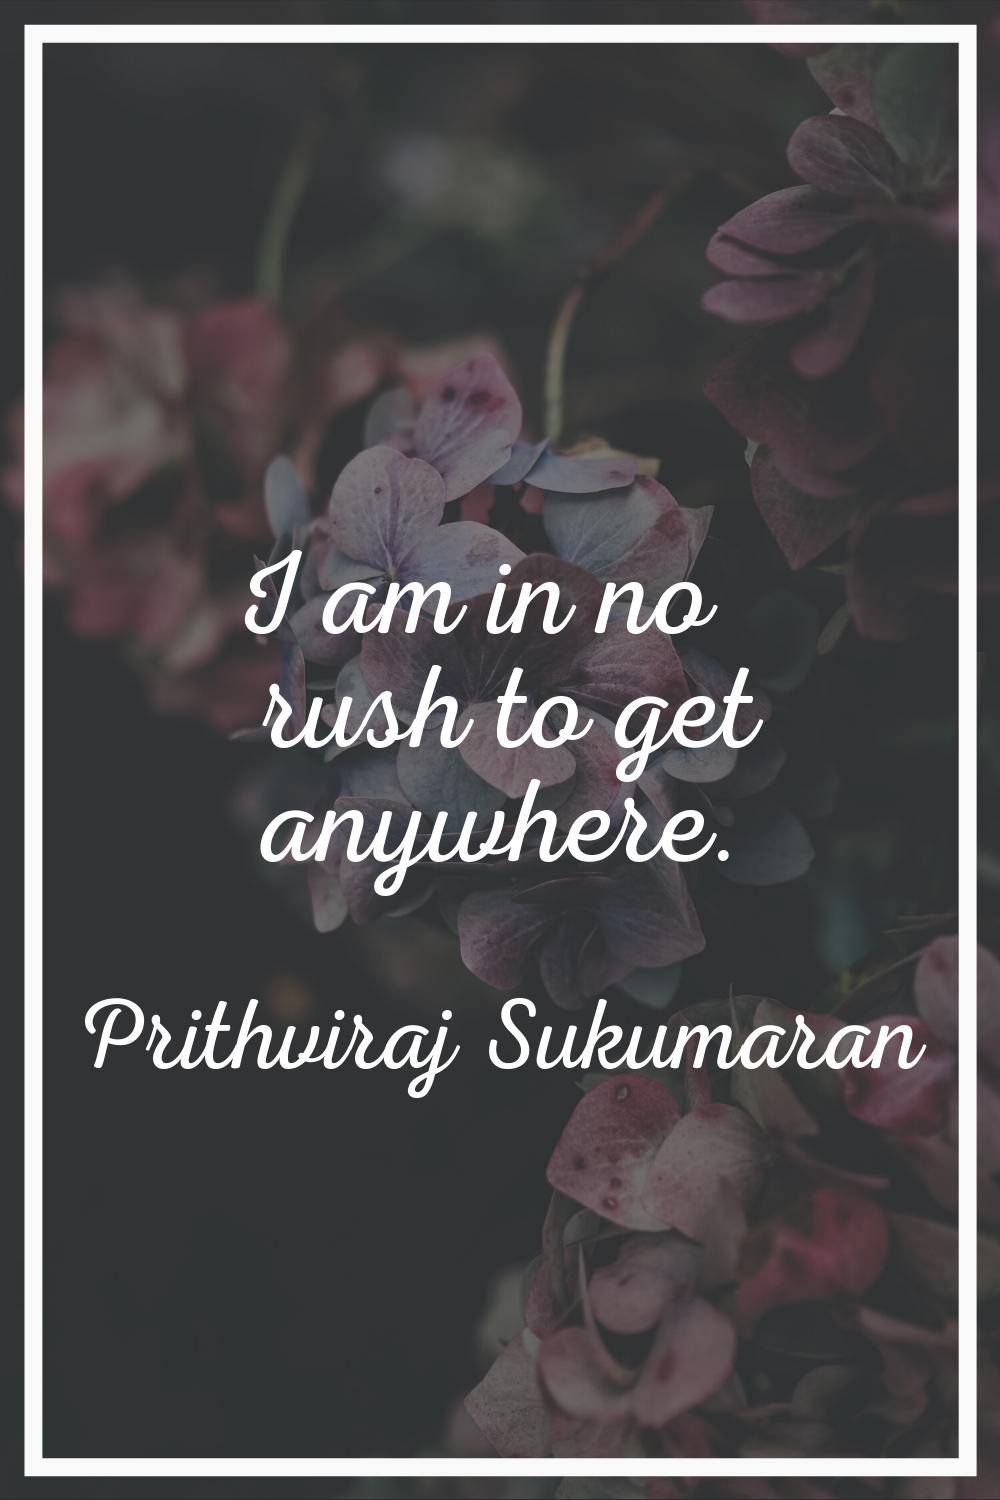 I am in no rush to get anywhere.